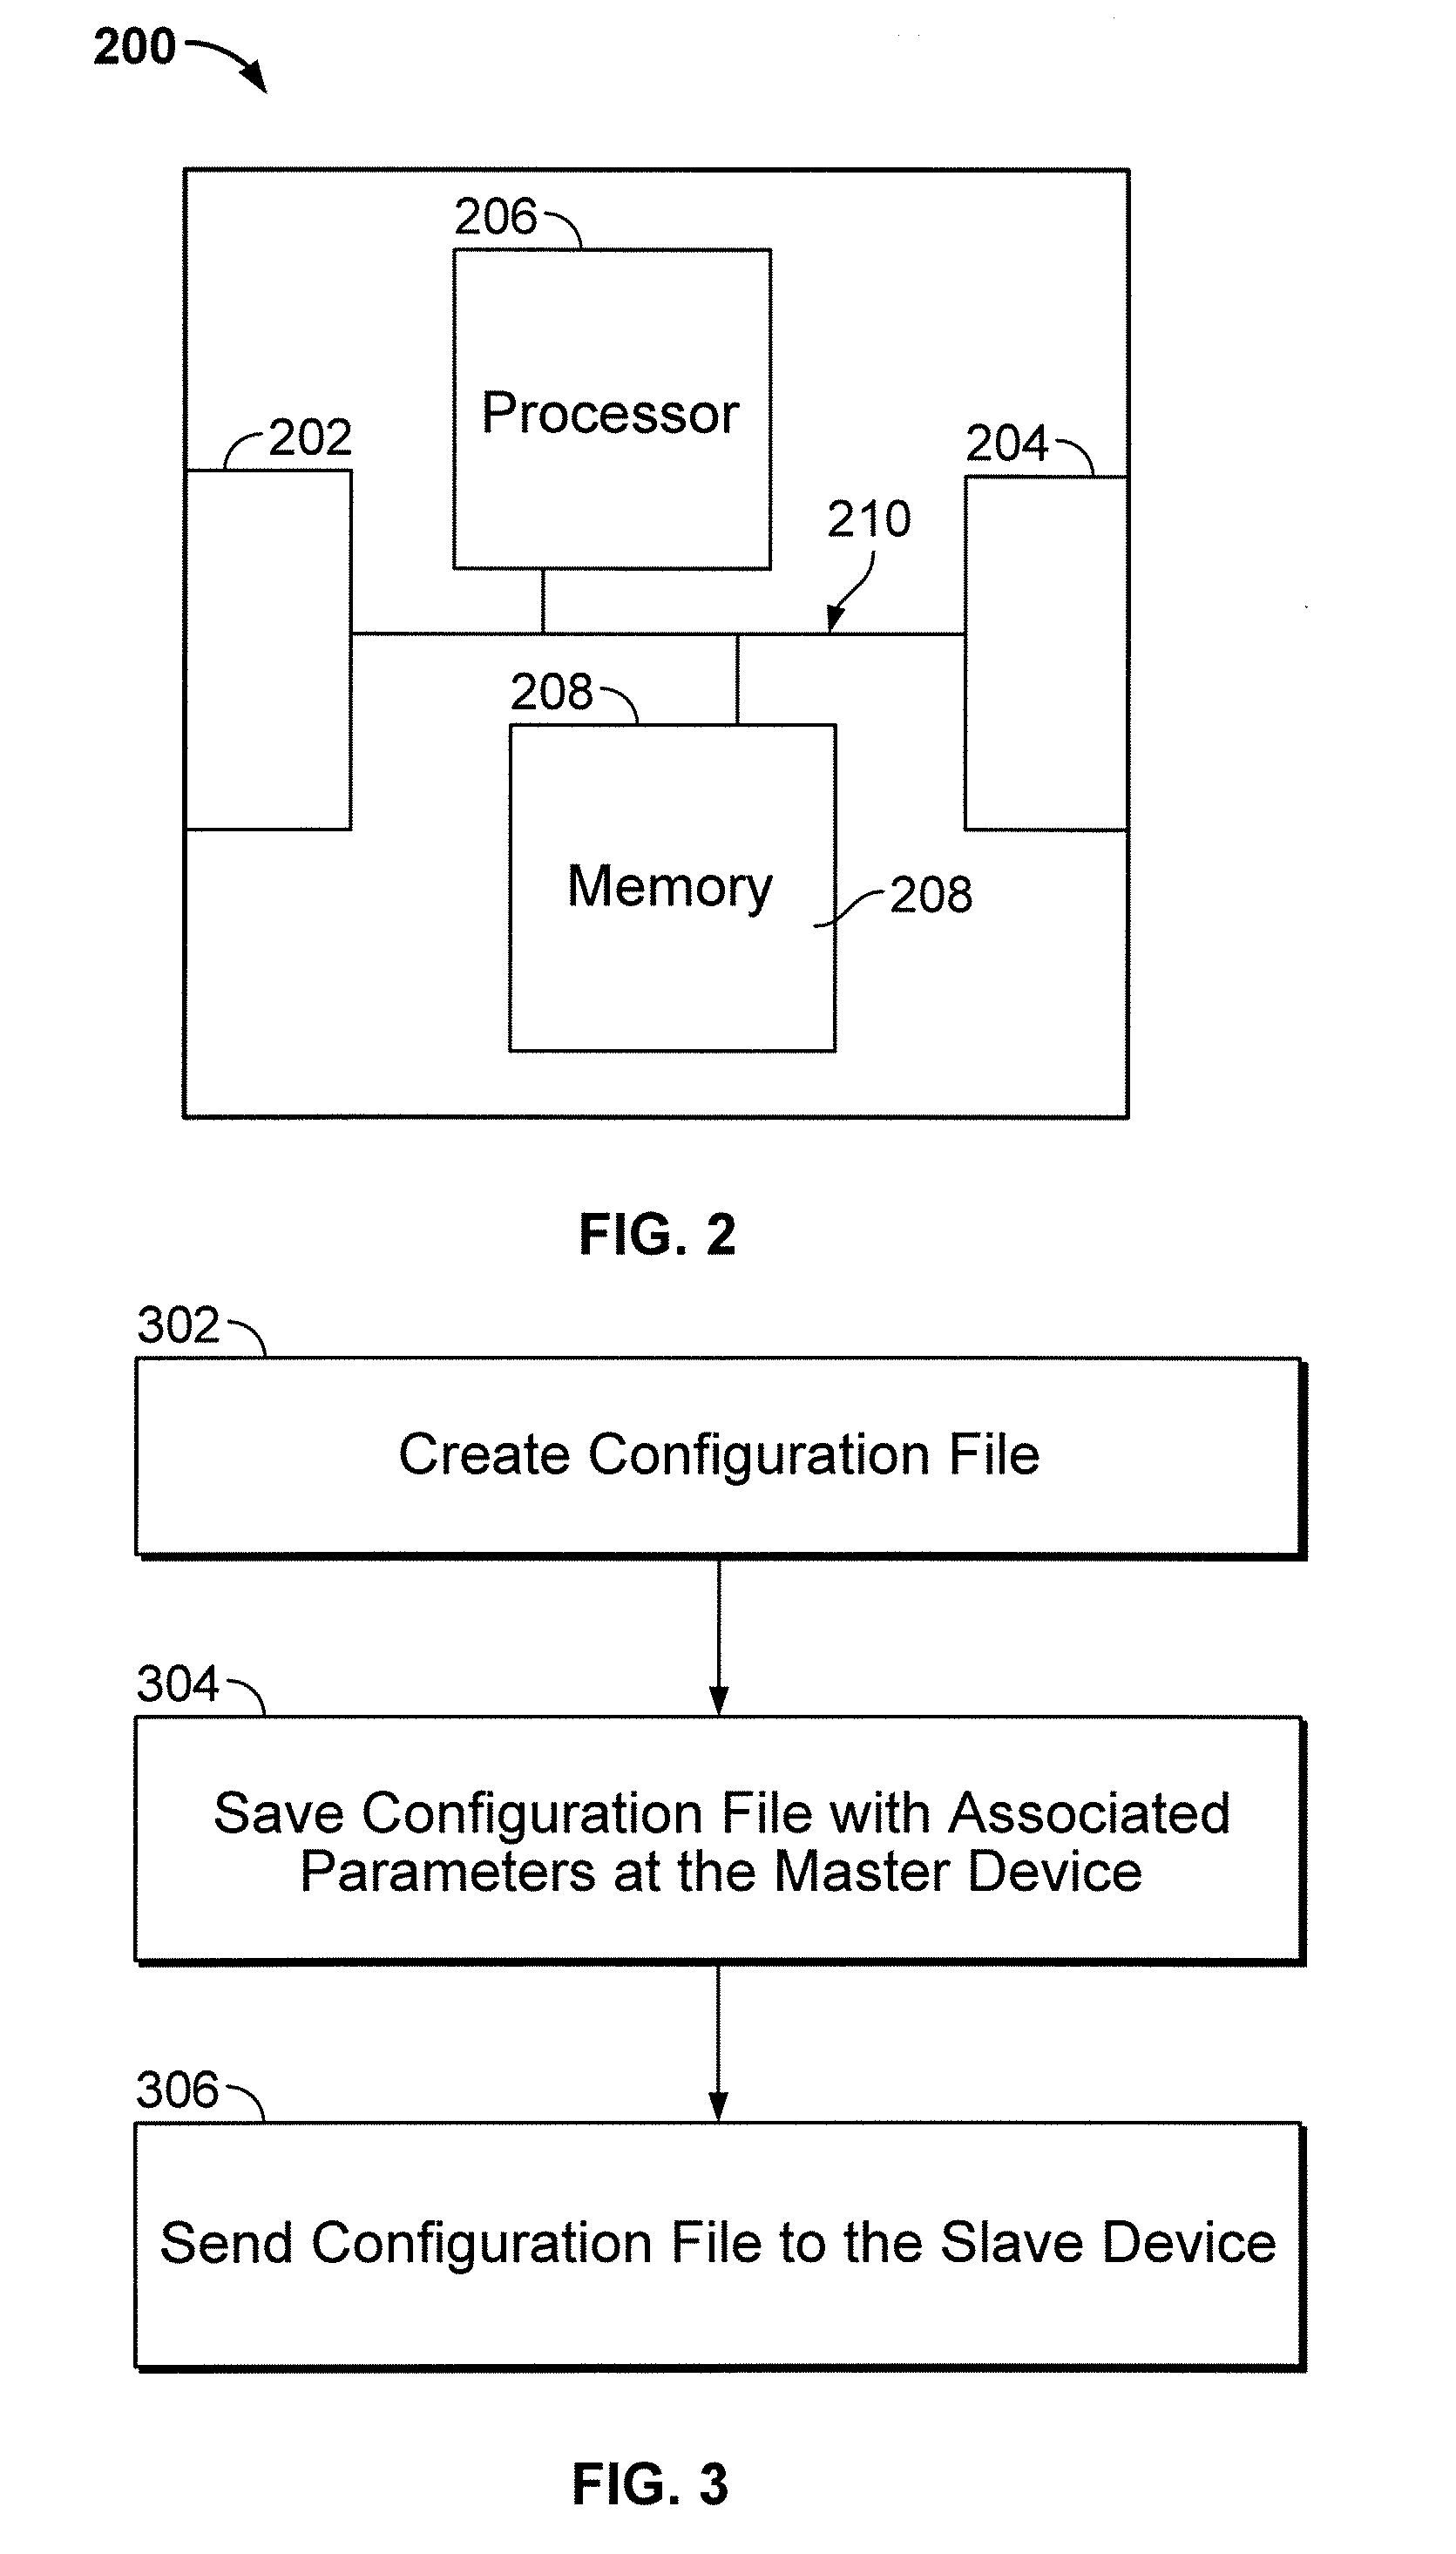 Method and Apparatus for Distributing Configuration Files in a Distributed Control System